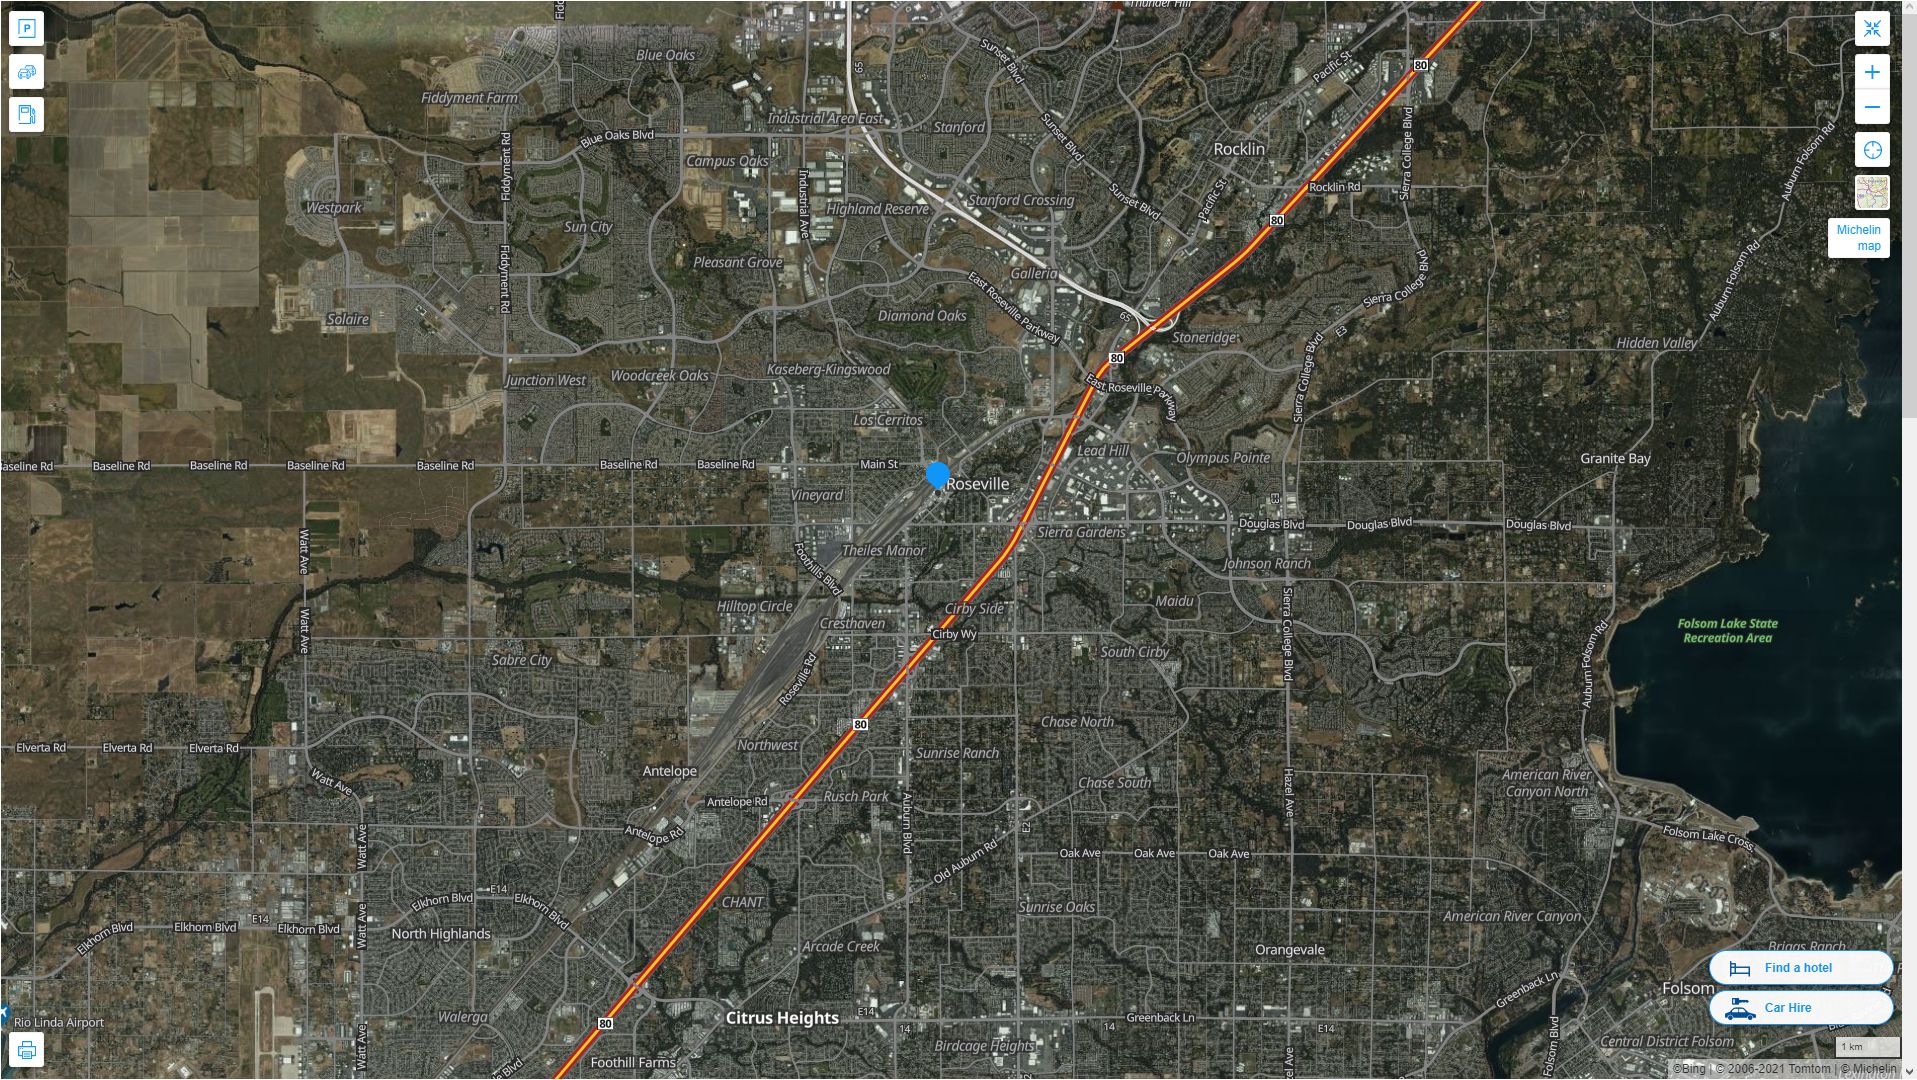 Roseville California Highway and Road Map with Satellite View